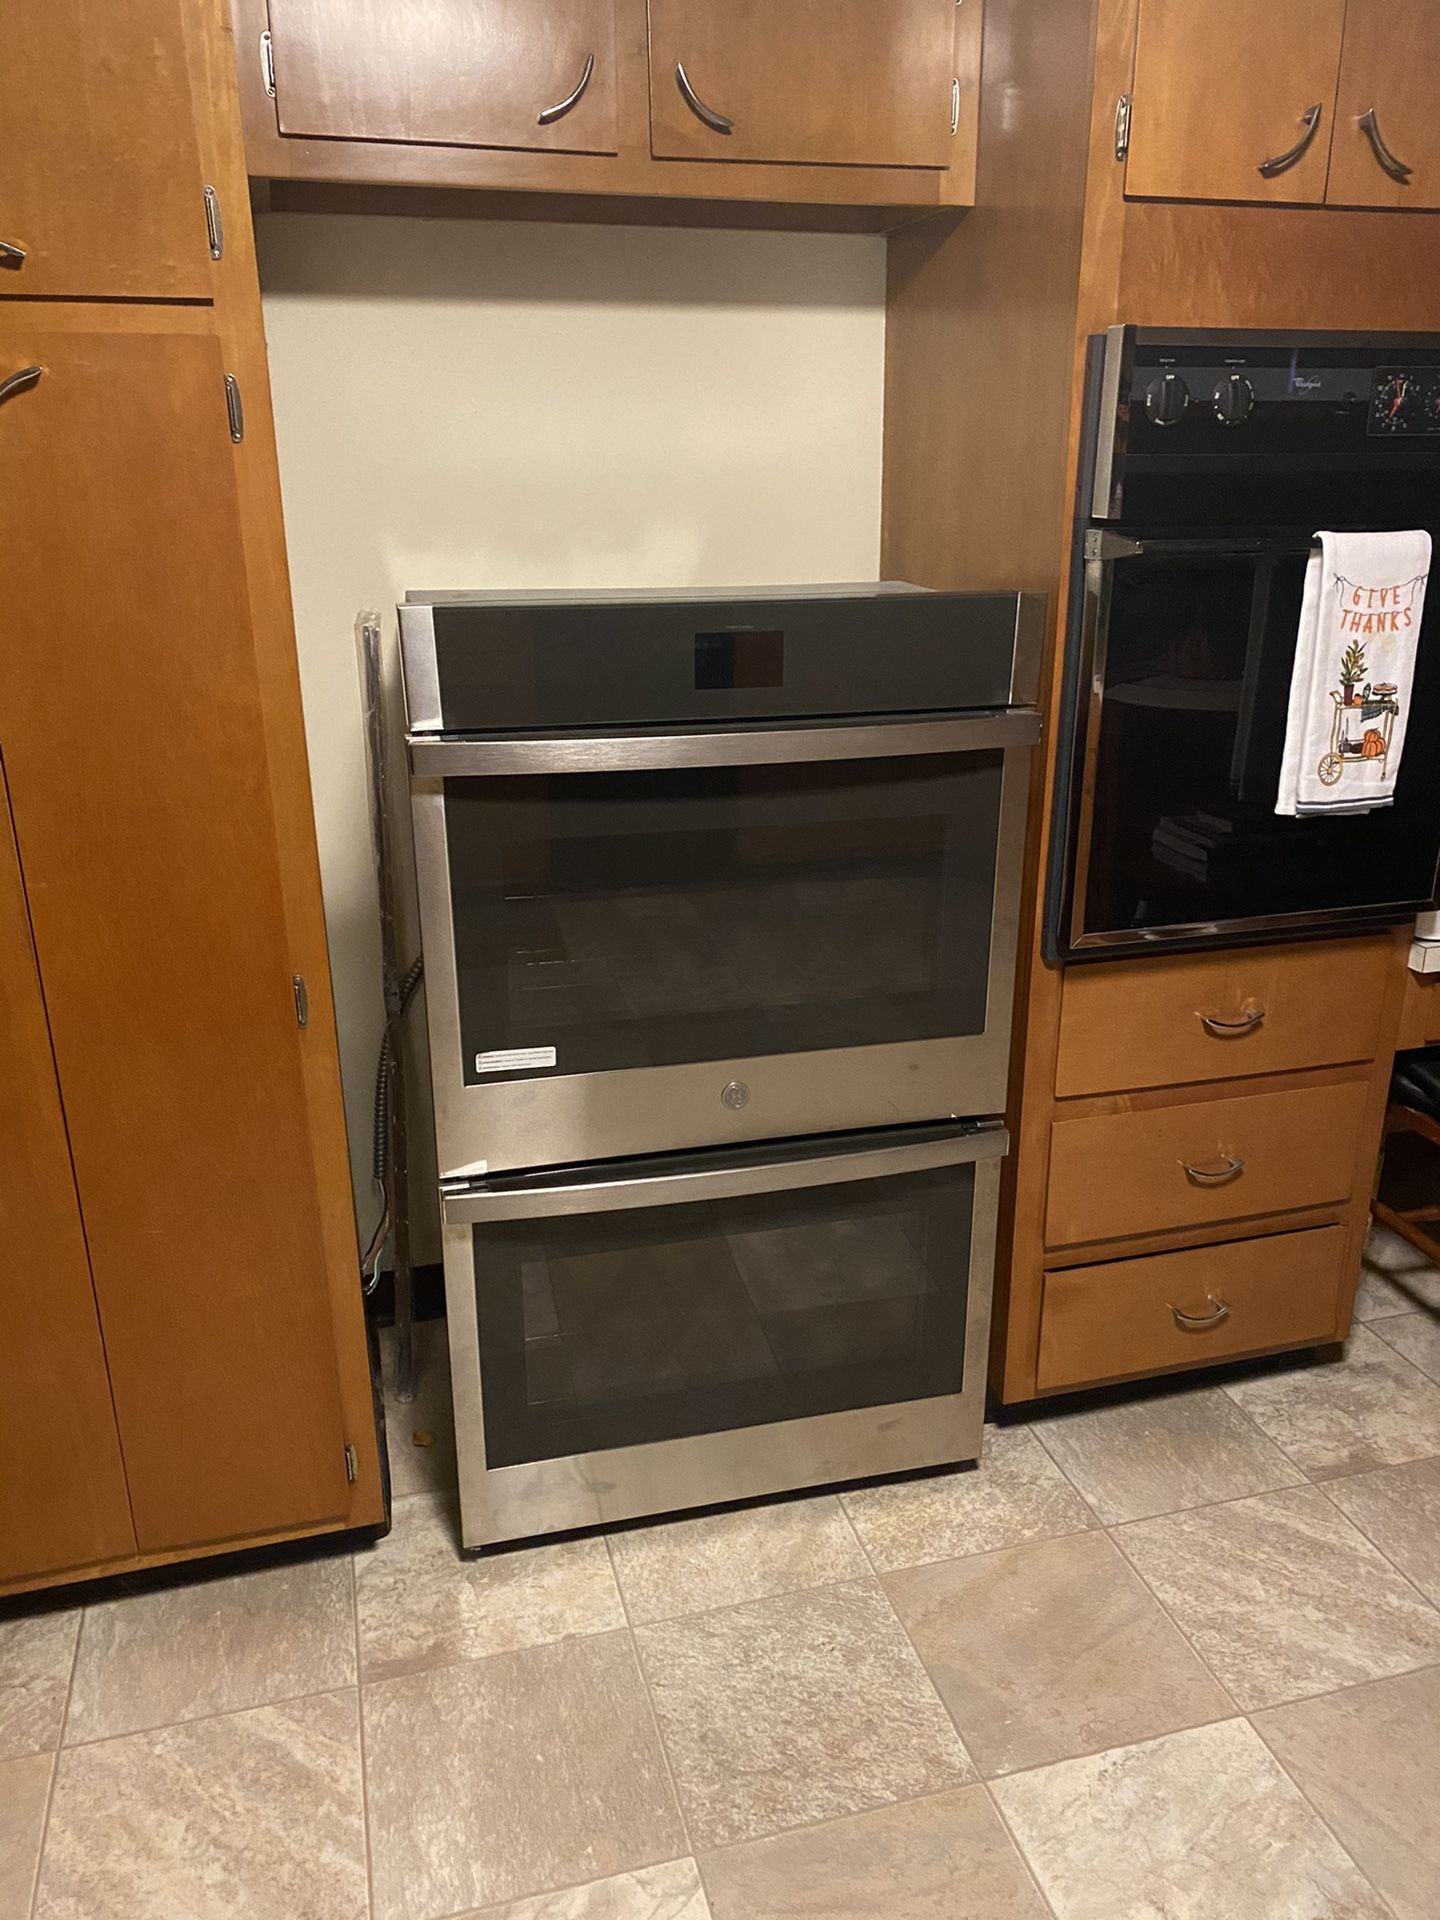 GE 30” Smart Self Clean Built-In Double Wall Oven